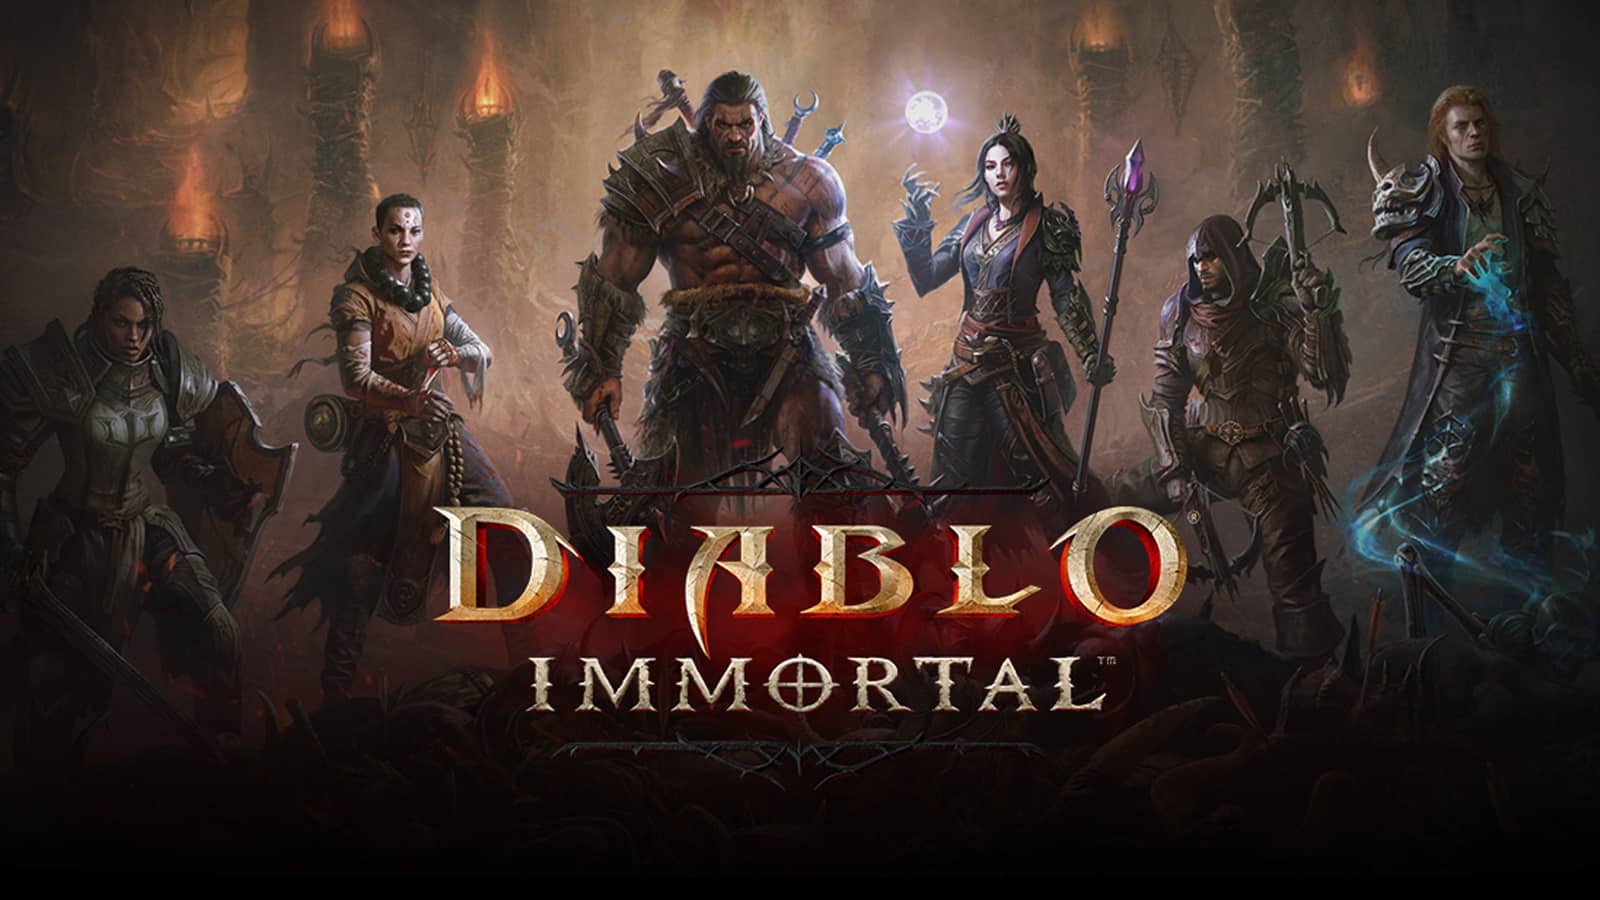 Diablo Immortal is a game designed to exploit your love of Diablo